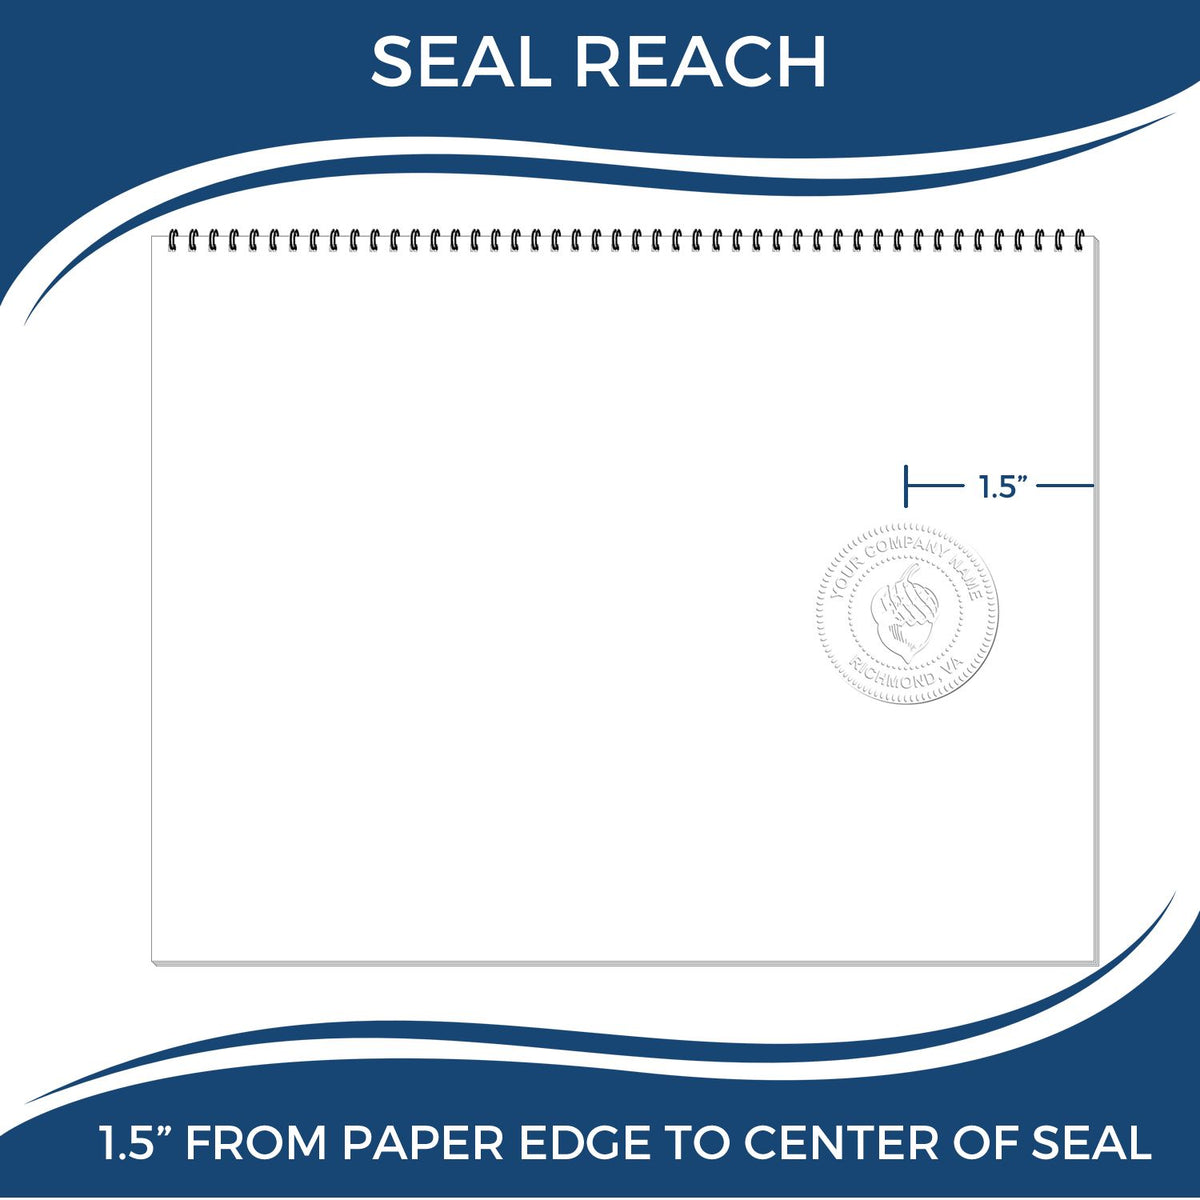 An infographic showing the seal reach which is represented by a ruler and a miniature seal image of the Kentucky Desk Architect Embossing Seal